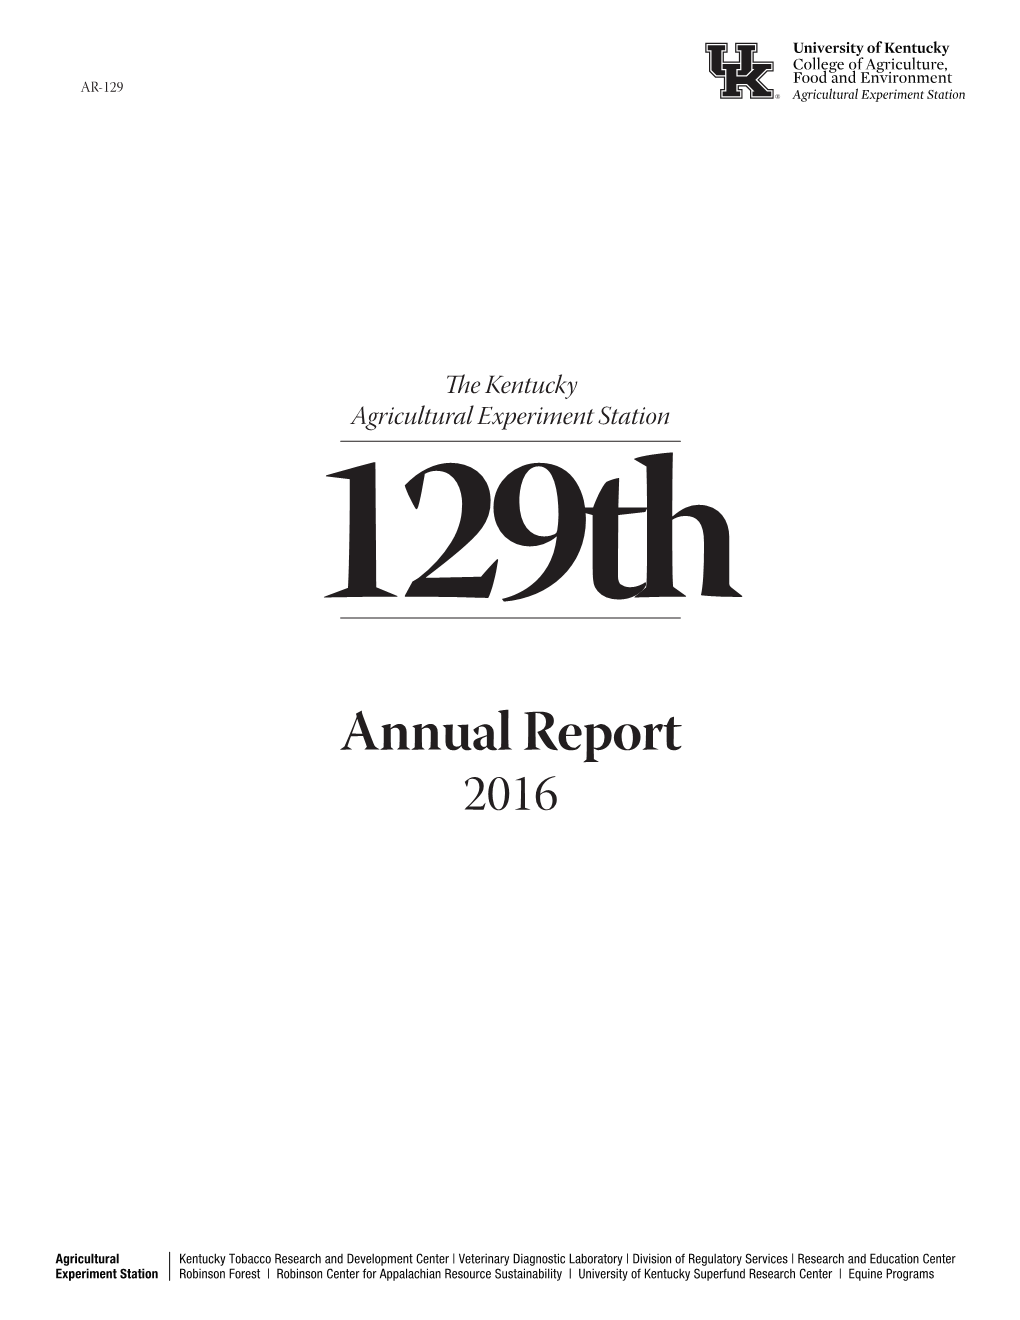 AR-129: 2016 Kentucky Agricultural Experiment Station Annual Report